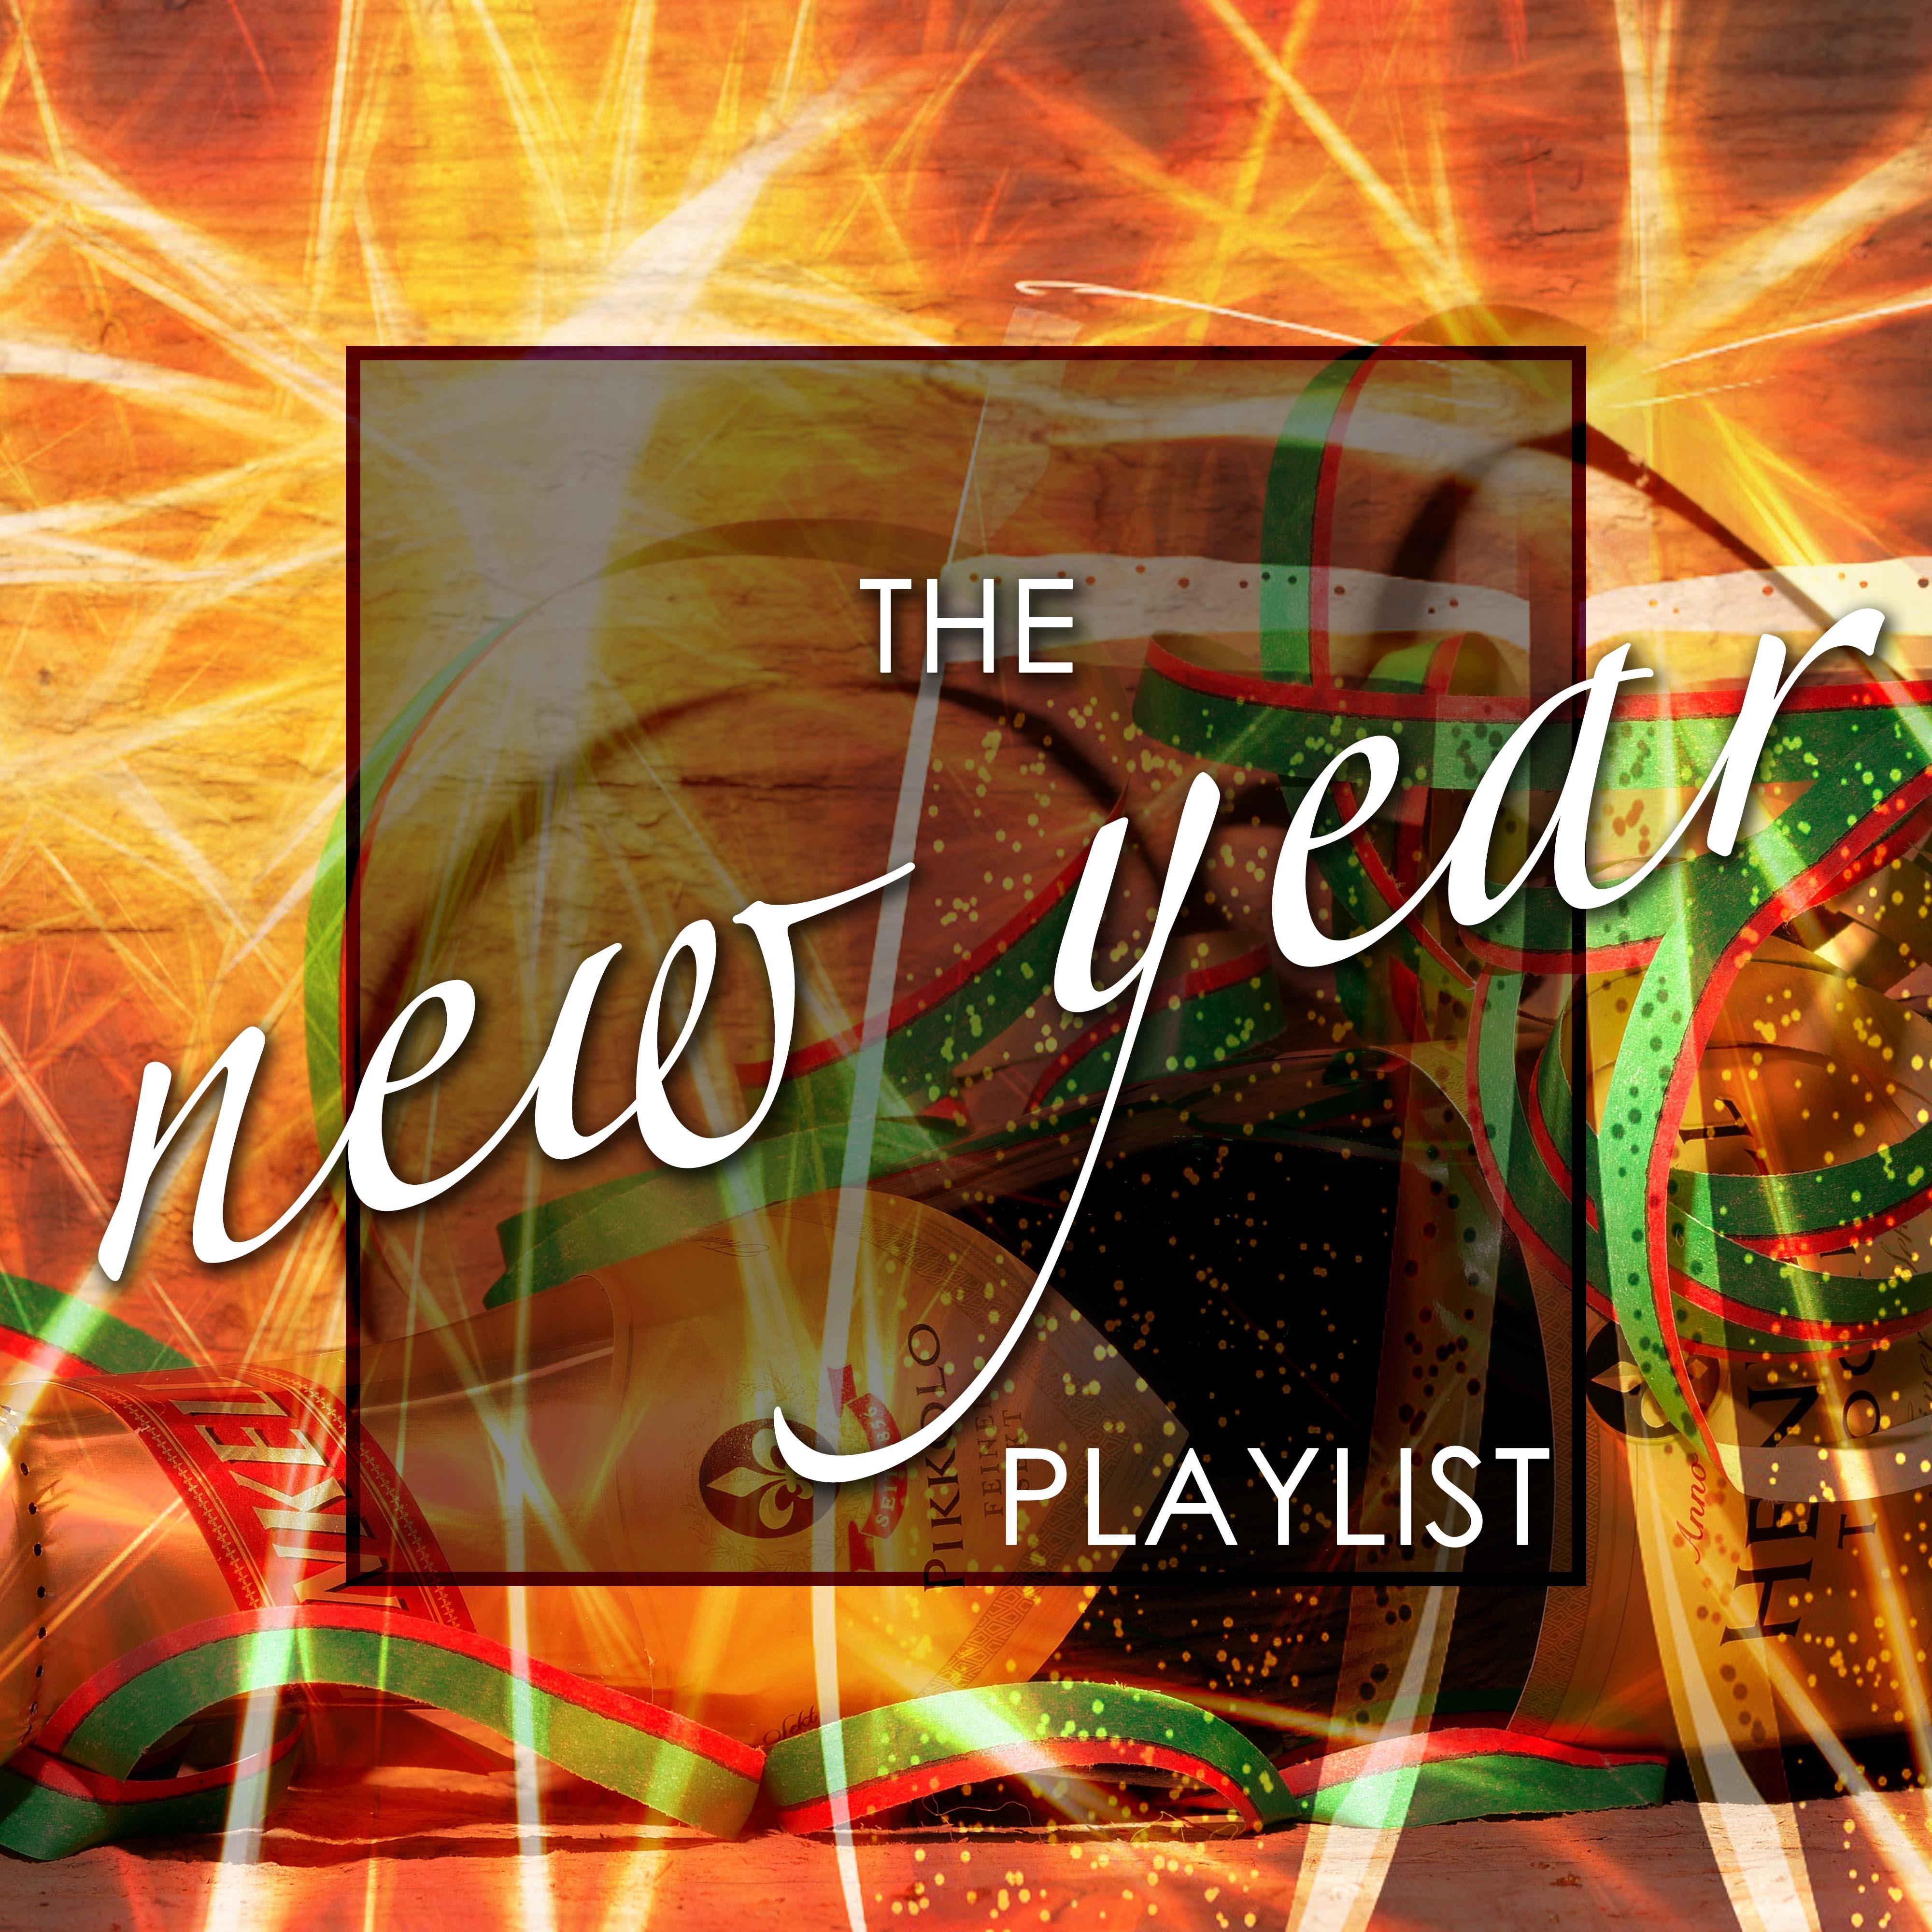 The New Year Playlist: the Perfect Electronic Music with House Beats, Latino Vibes to End the Current year